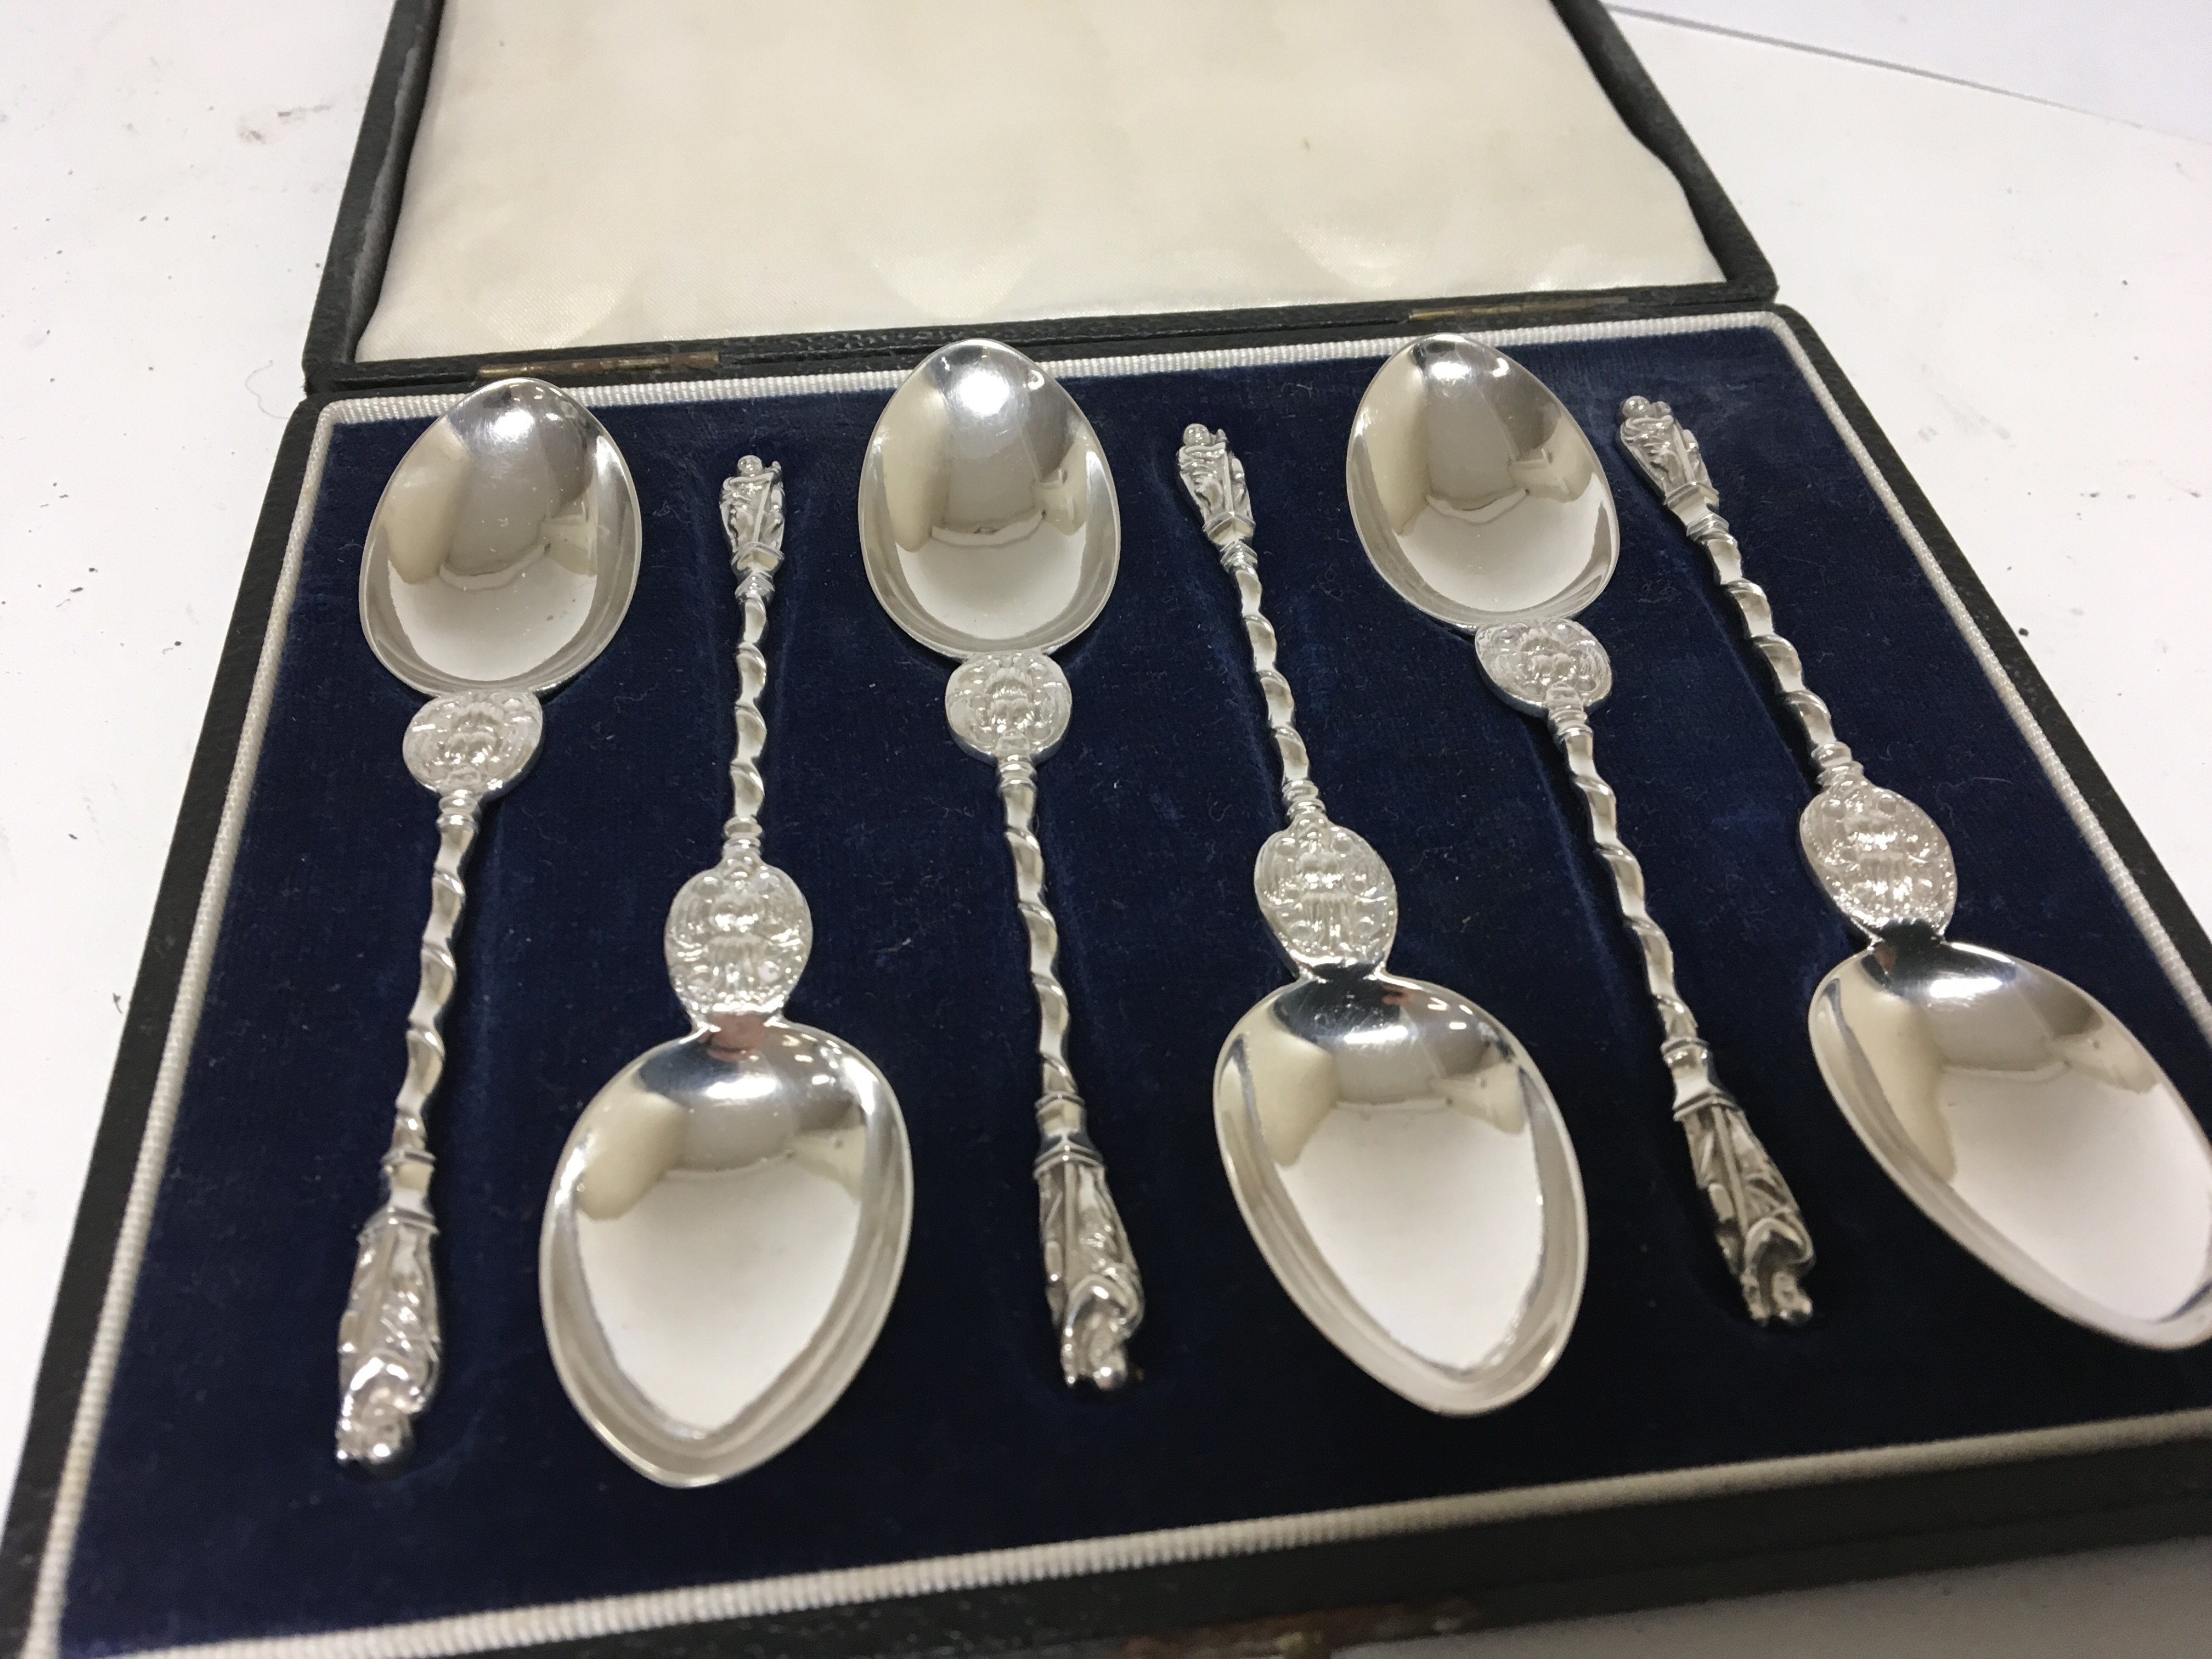 A cased set of Quality Victorian silver apostle spoons with shaped stems maker Henry Holland